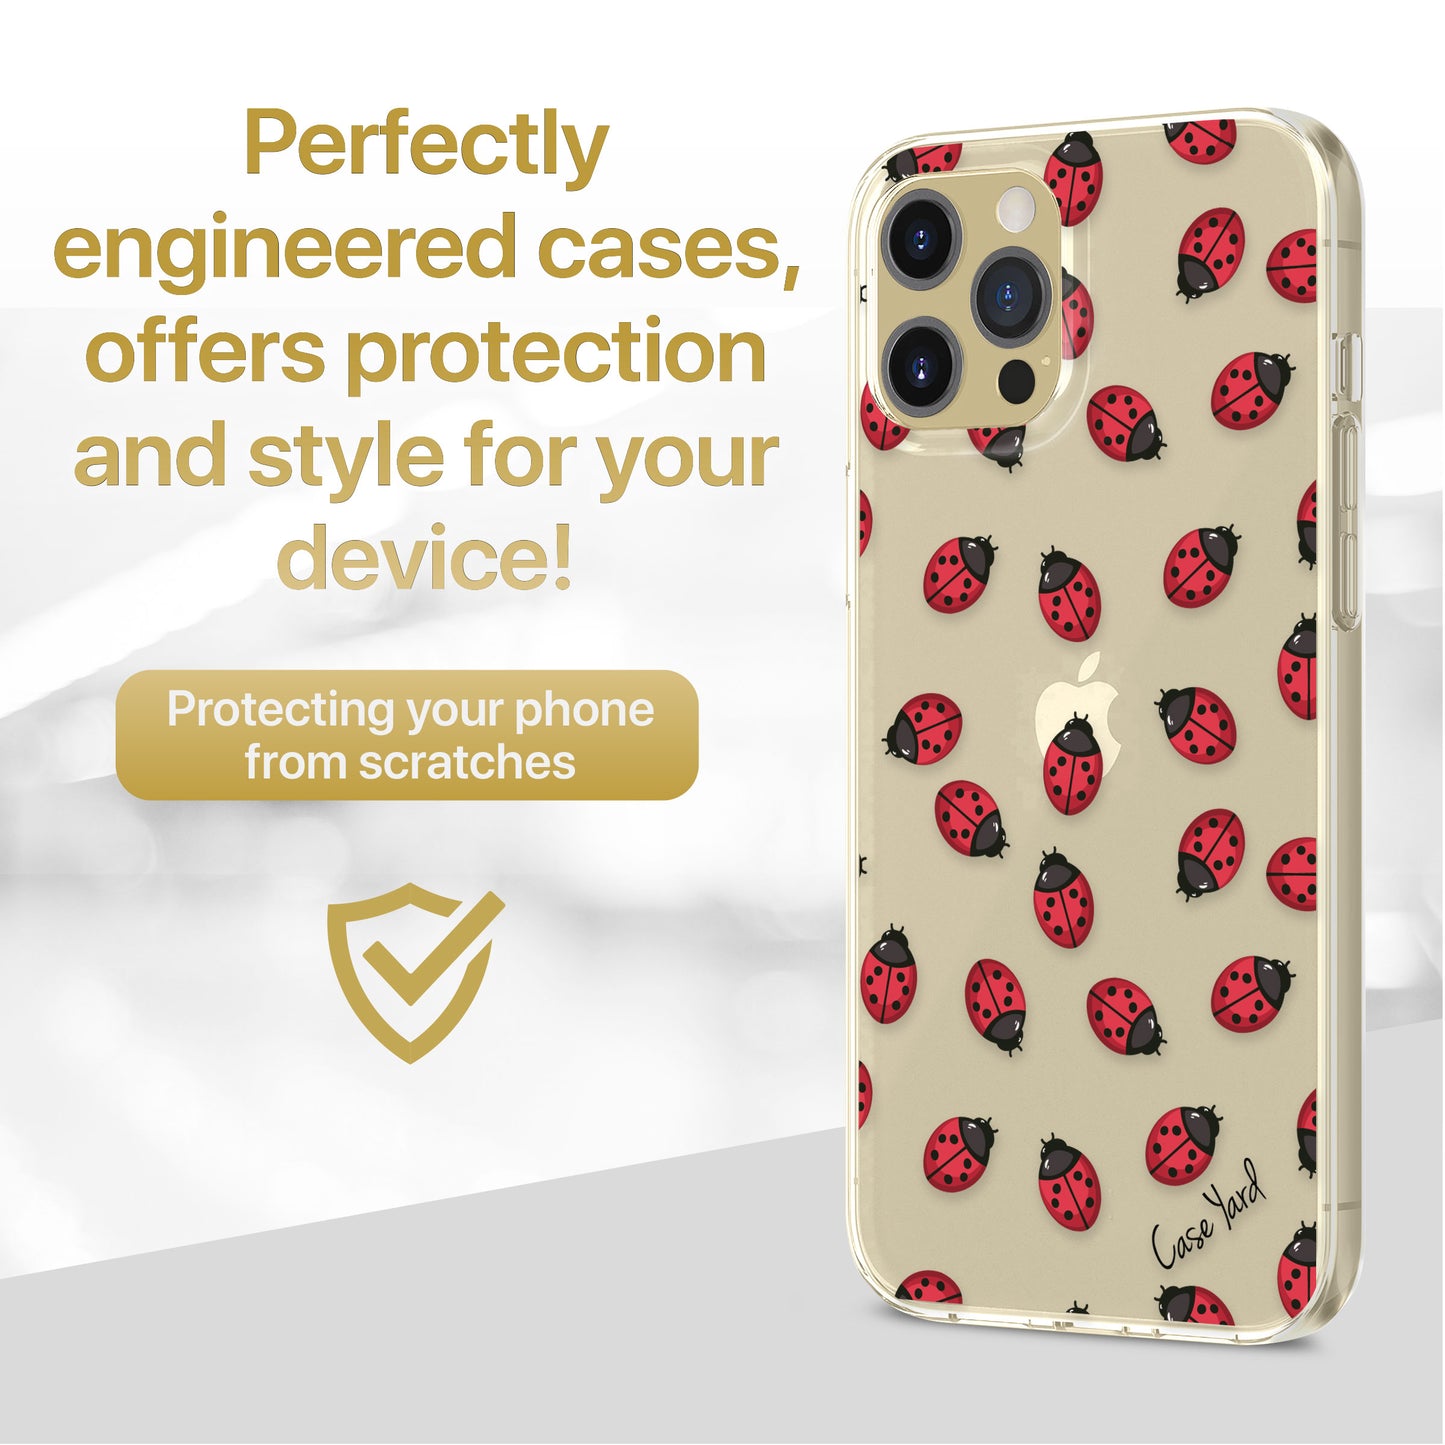 TPU Clear case with (Ladybug) Design for iPhone & Samsung Phones